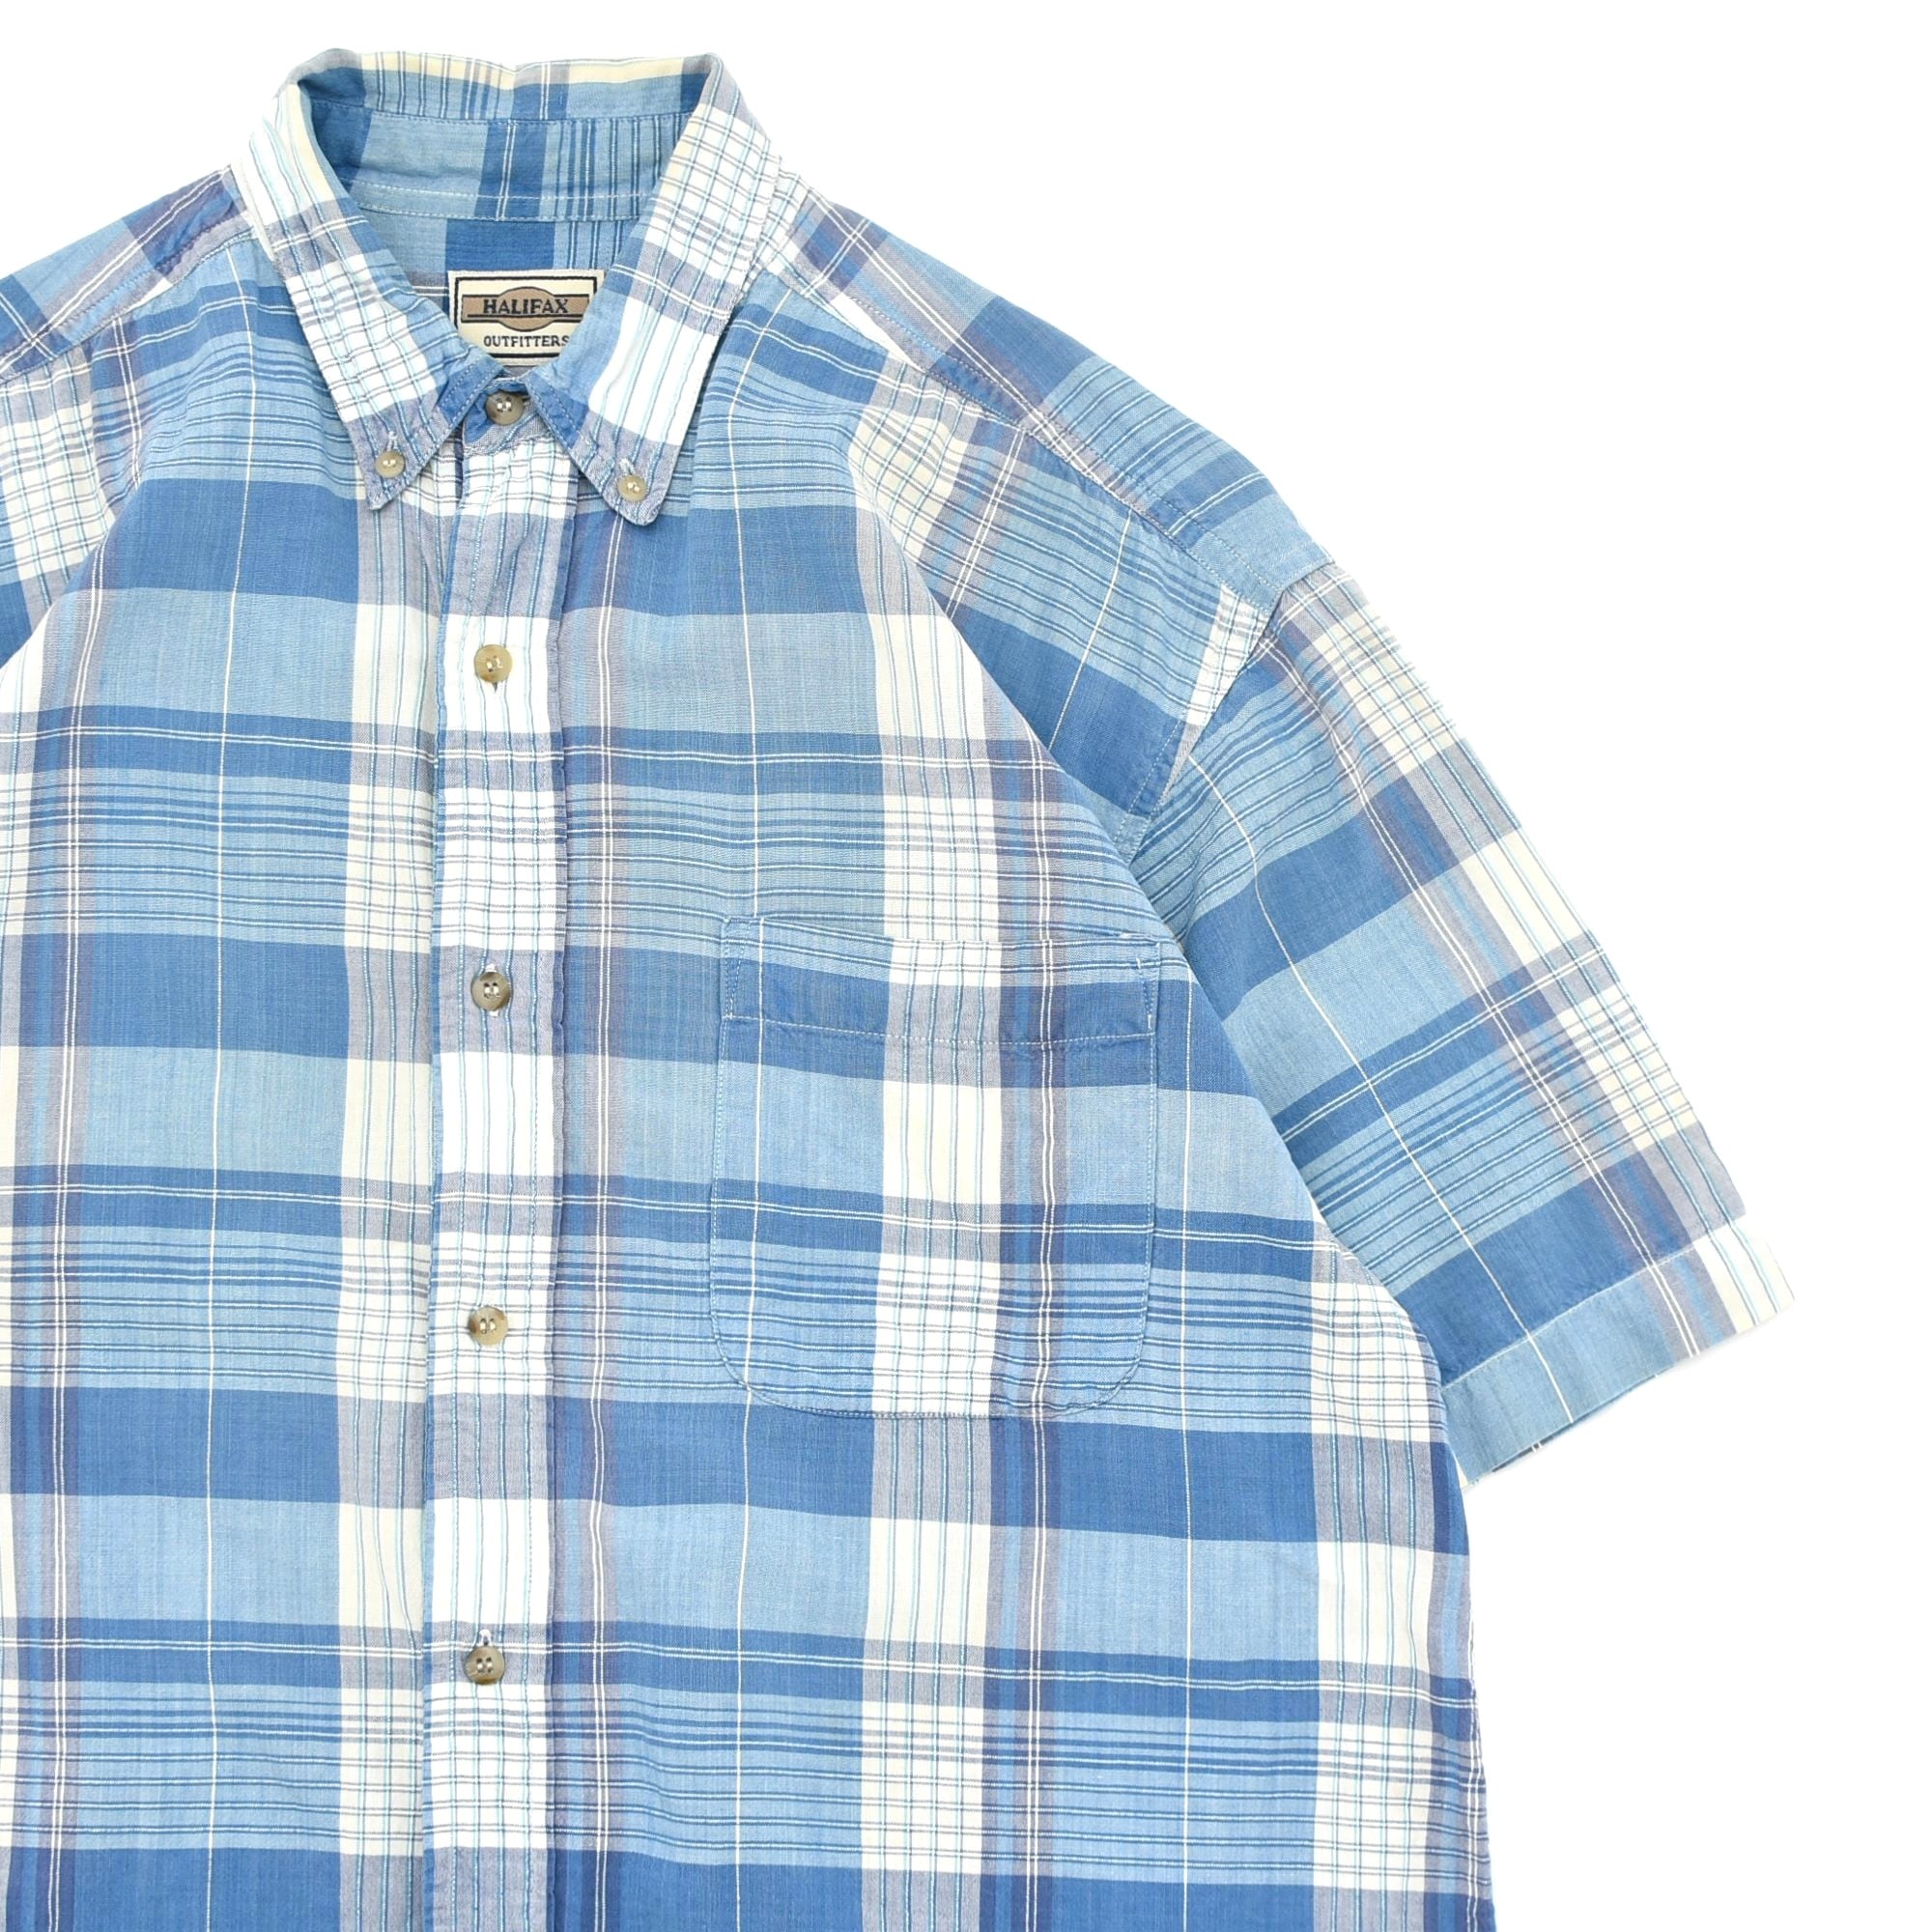 90's HALIFAX outfitters check BD shirt